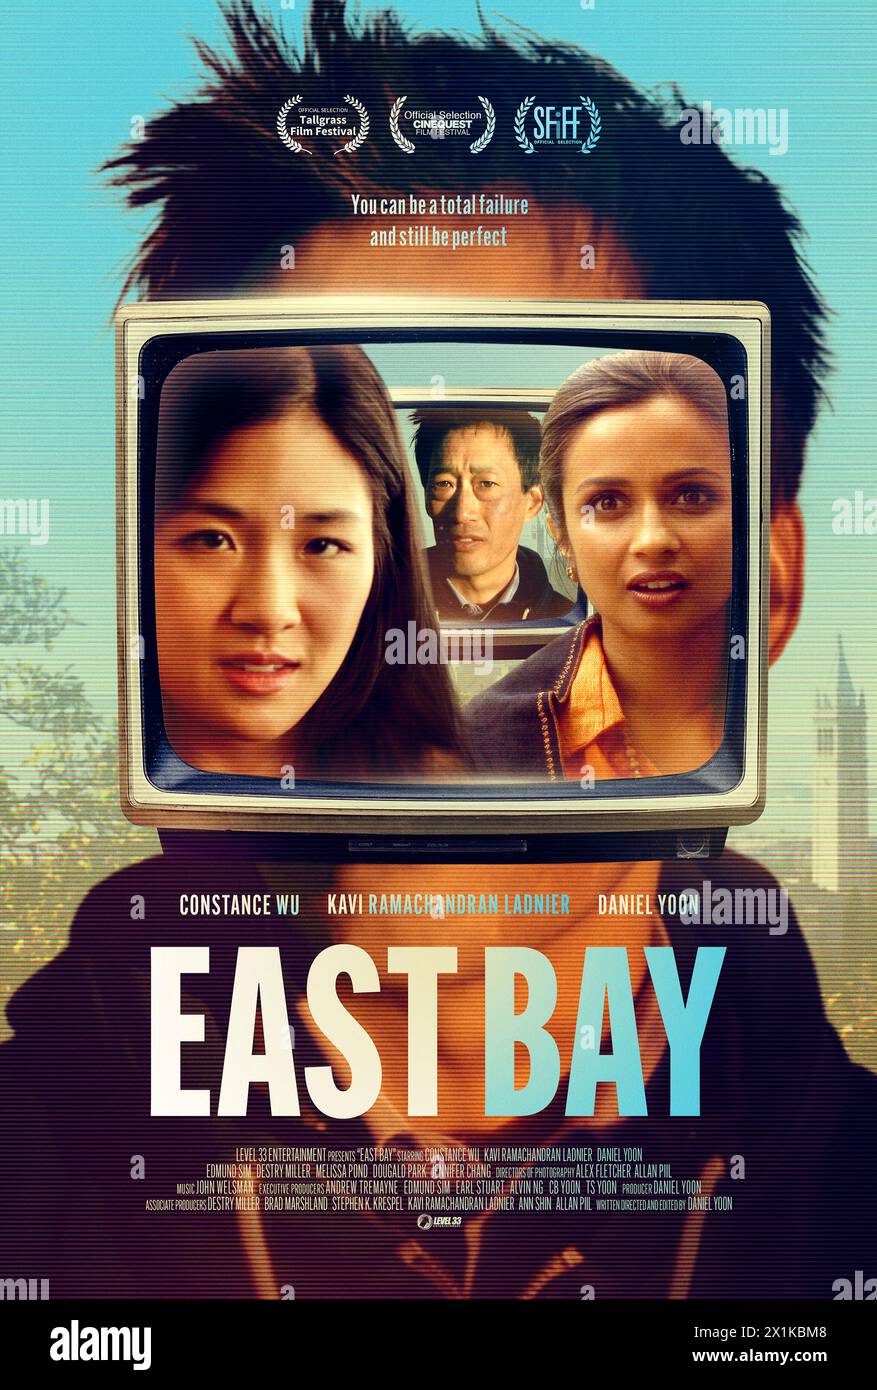 East Bay (2022) directed by Daniel Yoon and starring Constance Wu, Kavi Ramachandran Ladnier and Daniel Yoon. On reaching 39 and realising his life is a failure, Jack reaches out to others: an almost famous guru, a respected arts administrator, and two fellow computer programmers, all of whom have problems of their own. US one sheet poster.***EDITORIAL USE ONLY*** Credit: BFA / Level 33 Entertainment Stock Photo